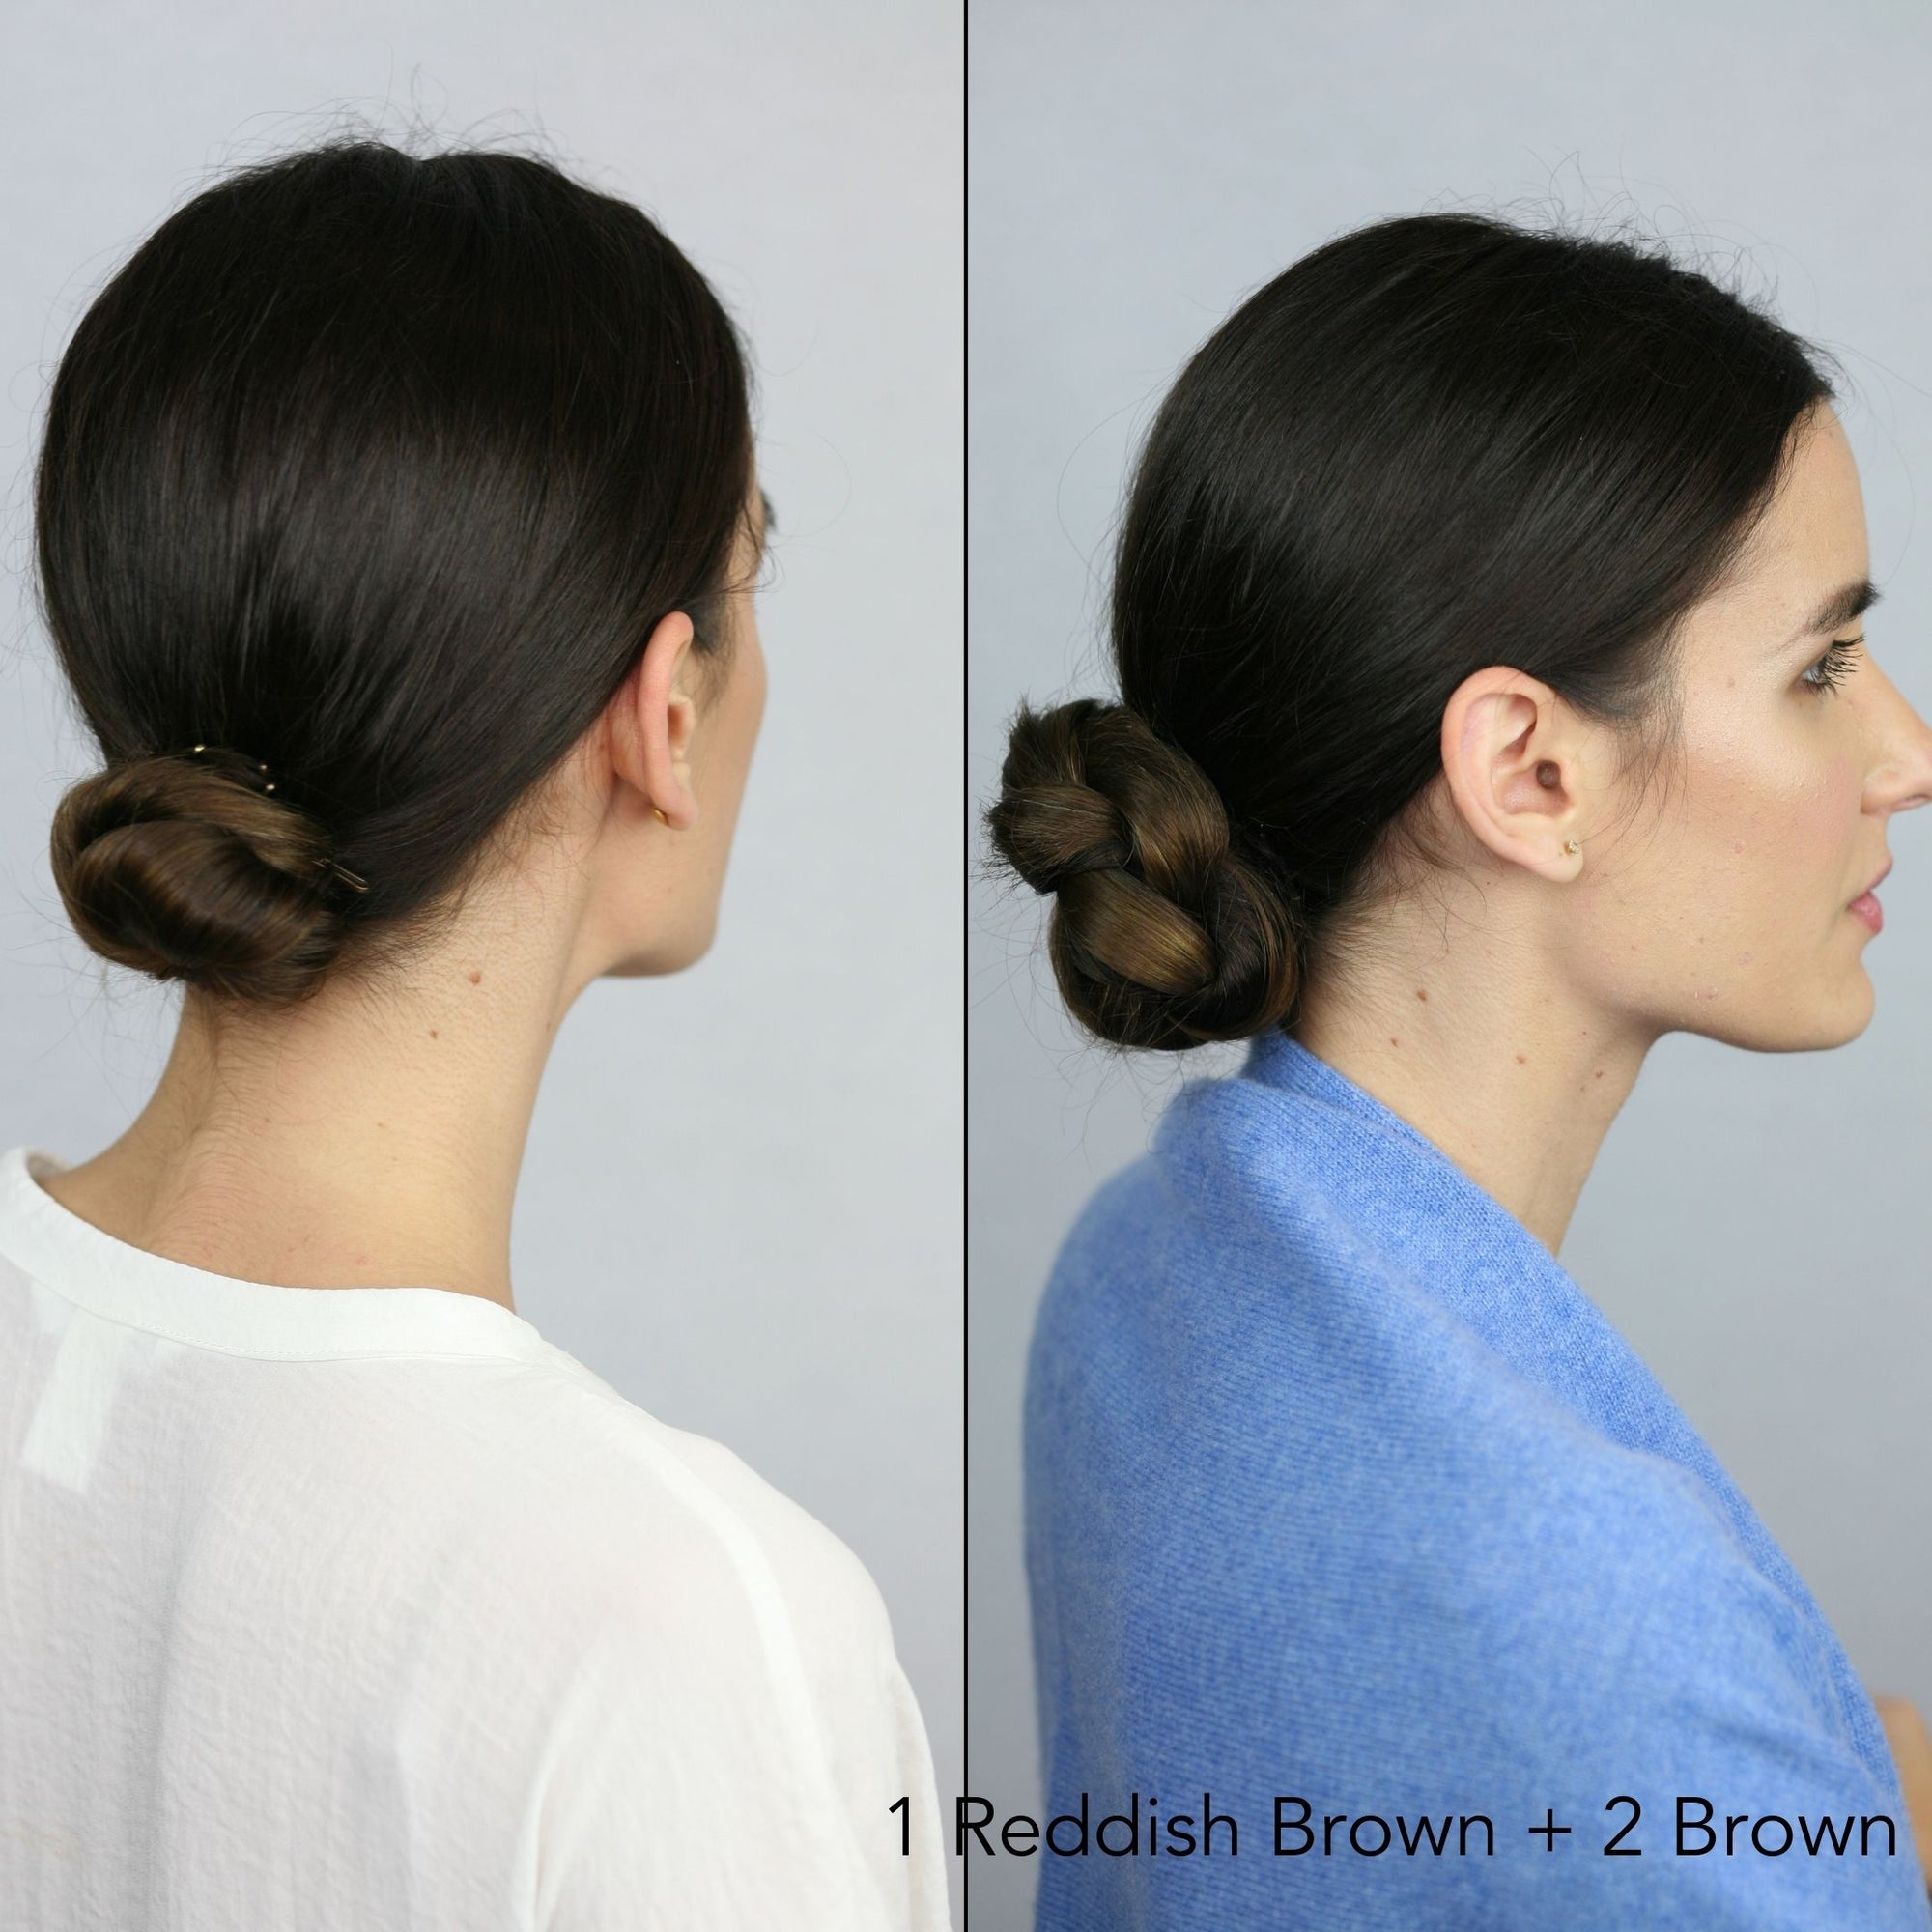 Transformation photo of Before After Half Up Half Down Hairstyle with woman in a white shirt and a bigger Half Up topknot using Easy Updo Extensions mixed with Fine long brown hair